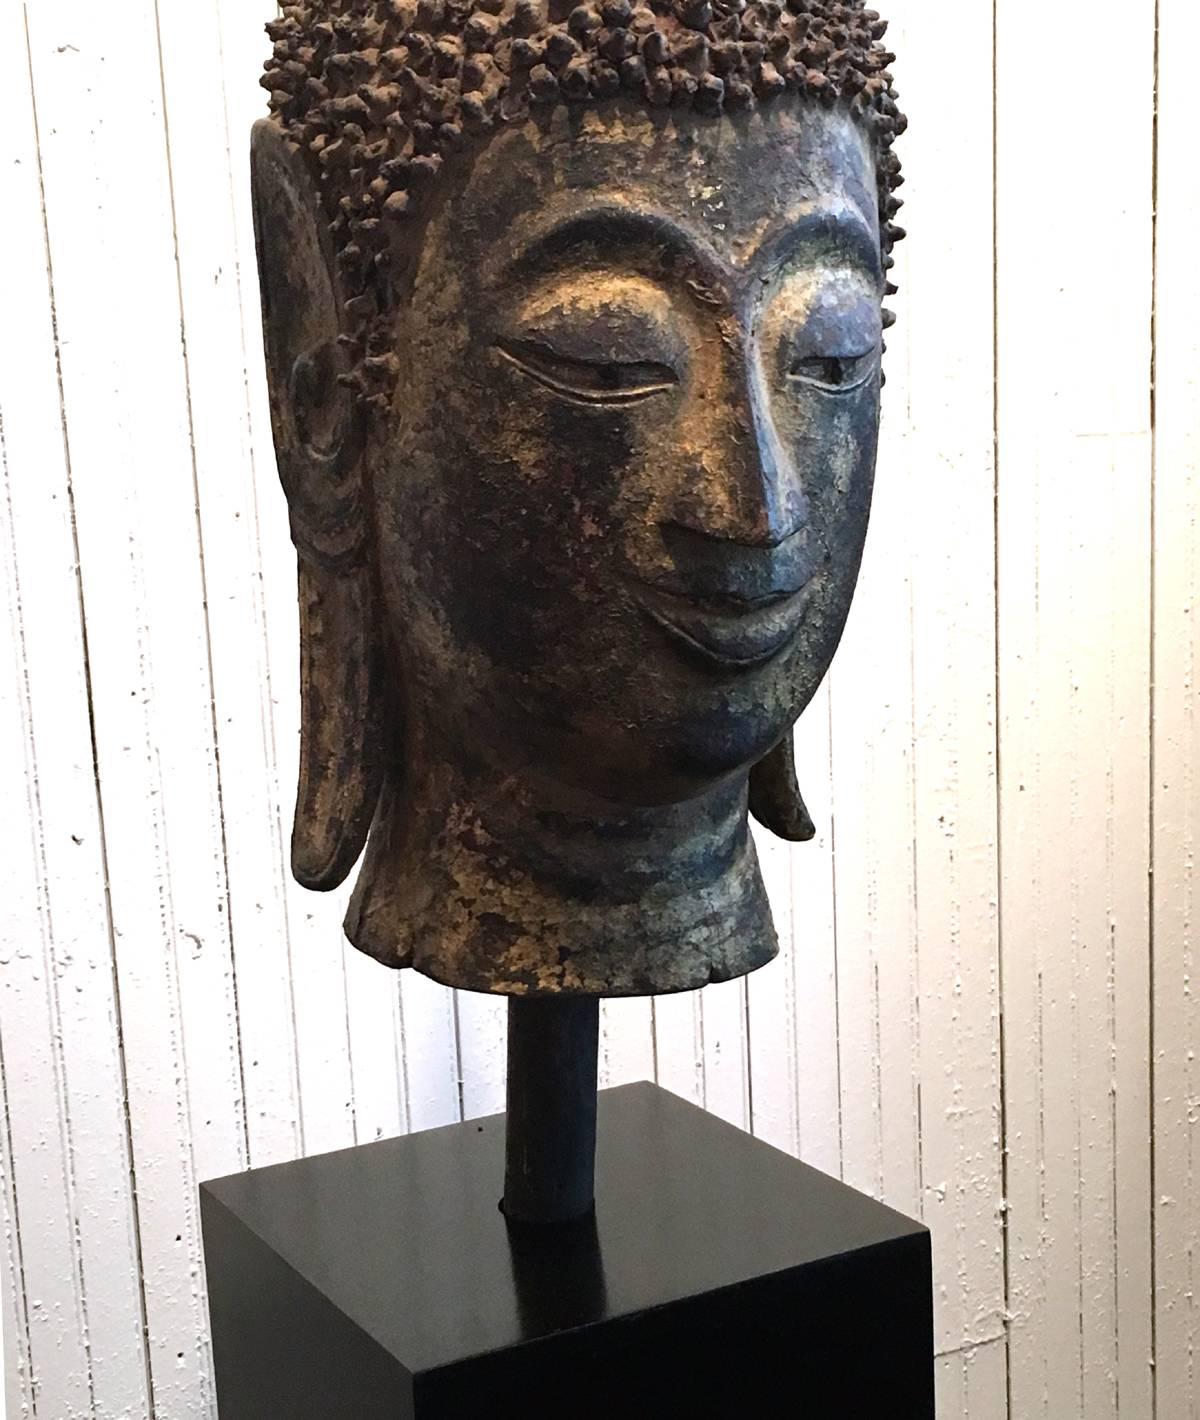 An impressive and large Buddha head from Loas circa 19th century now displayed on a new wood base. The carving is very fluid and strong with gilt surface. The hair was made with a mud like material and due to its age, there is some loss.